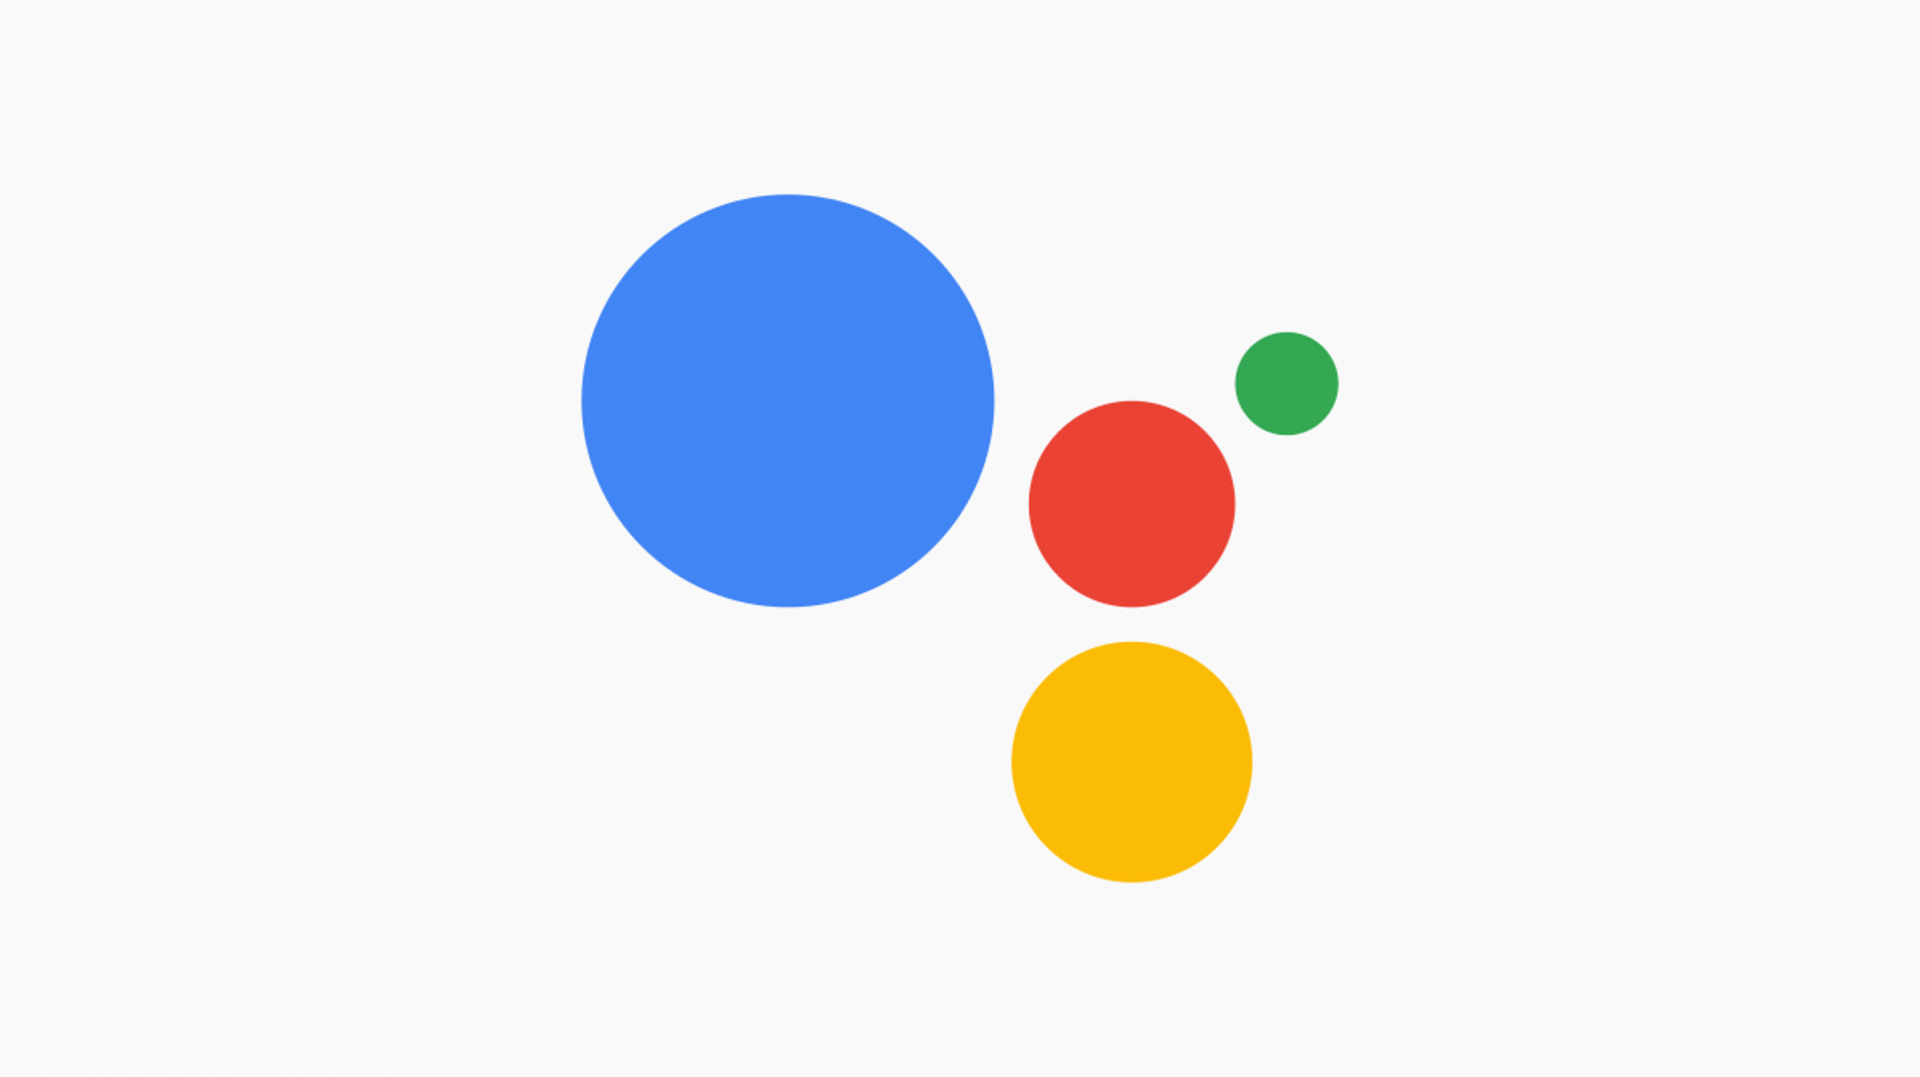 How you possibly may perchance perchance Disable the Google Assistant Swipe Gesture on Android